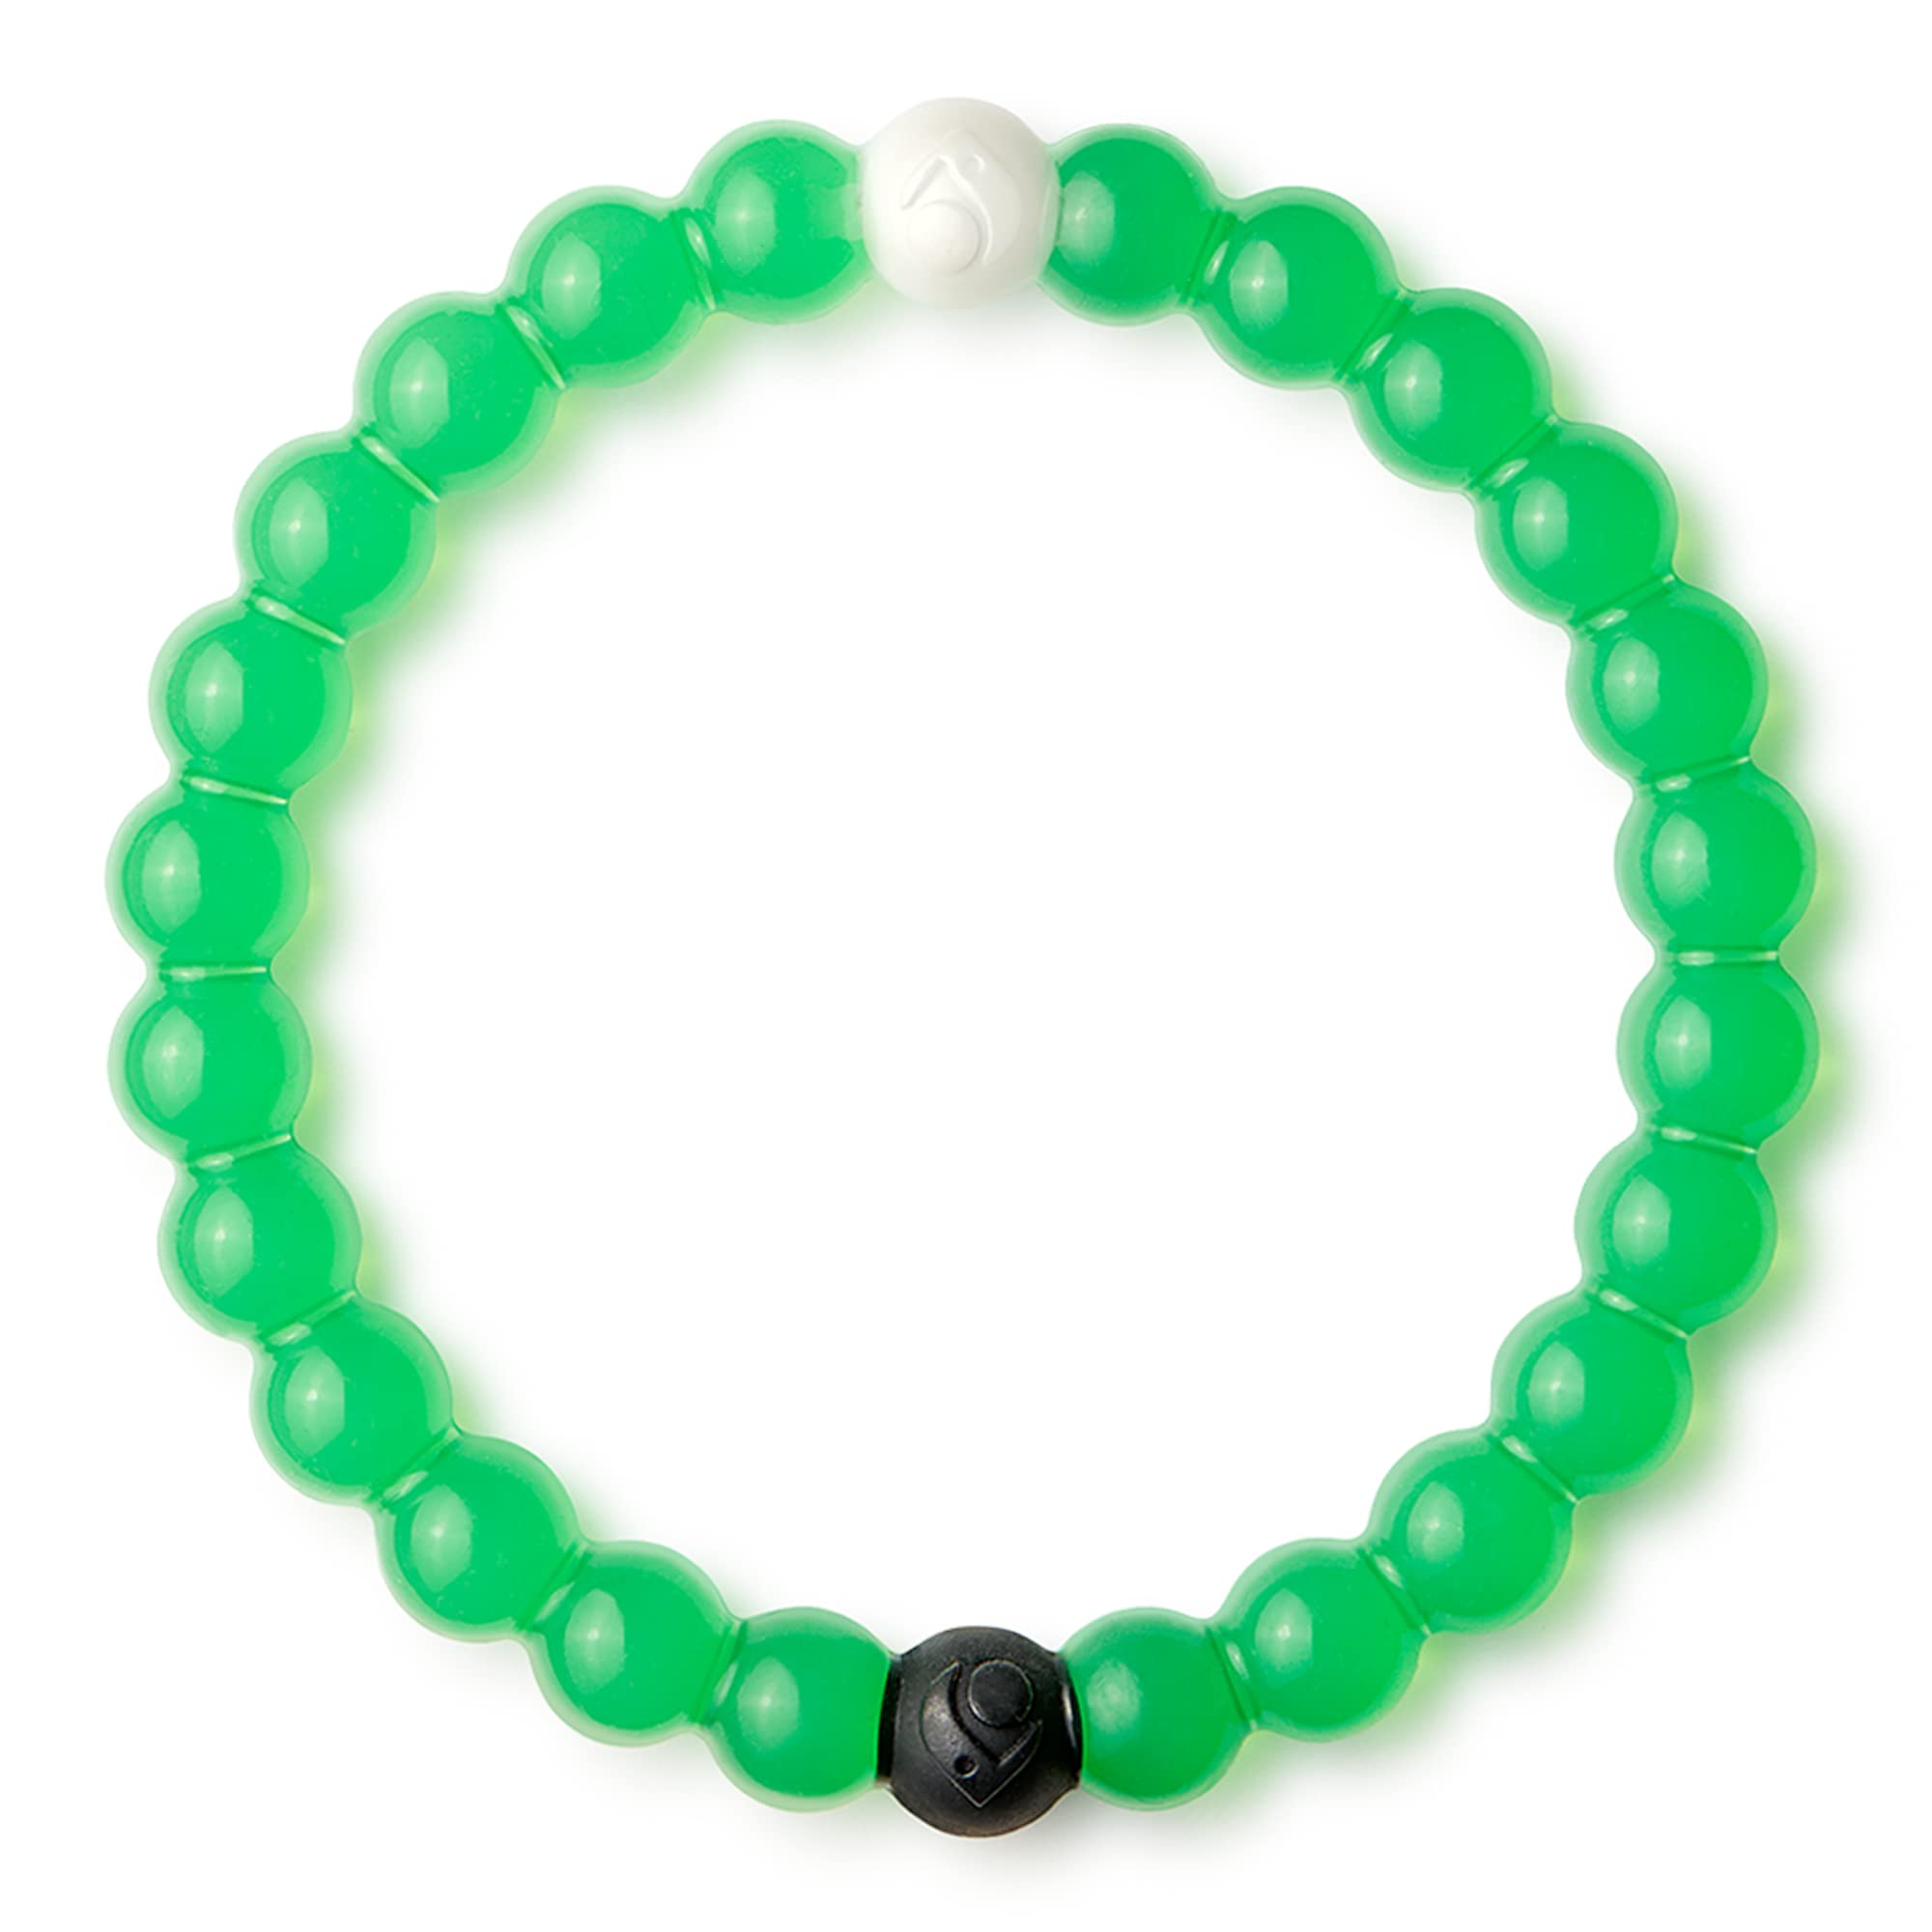 Lokai Silicone Beaded Bracelet for Environment Cause - Medium, 6.5 Inch Circumference - Jewelry Fashion Bracelet Slides-On for Comfortable Fit for Men, Women & Kids